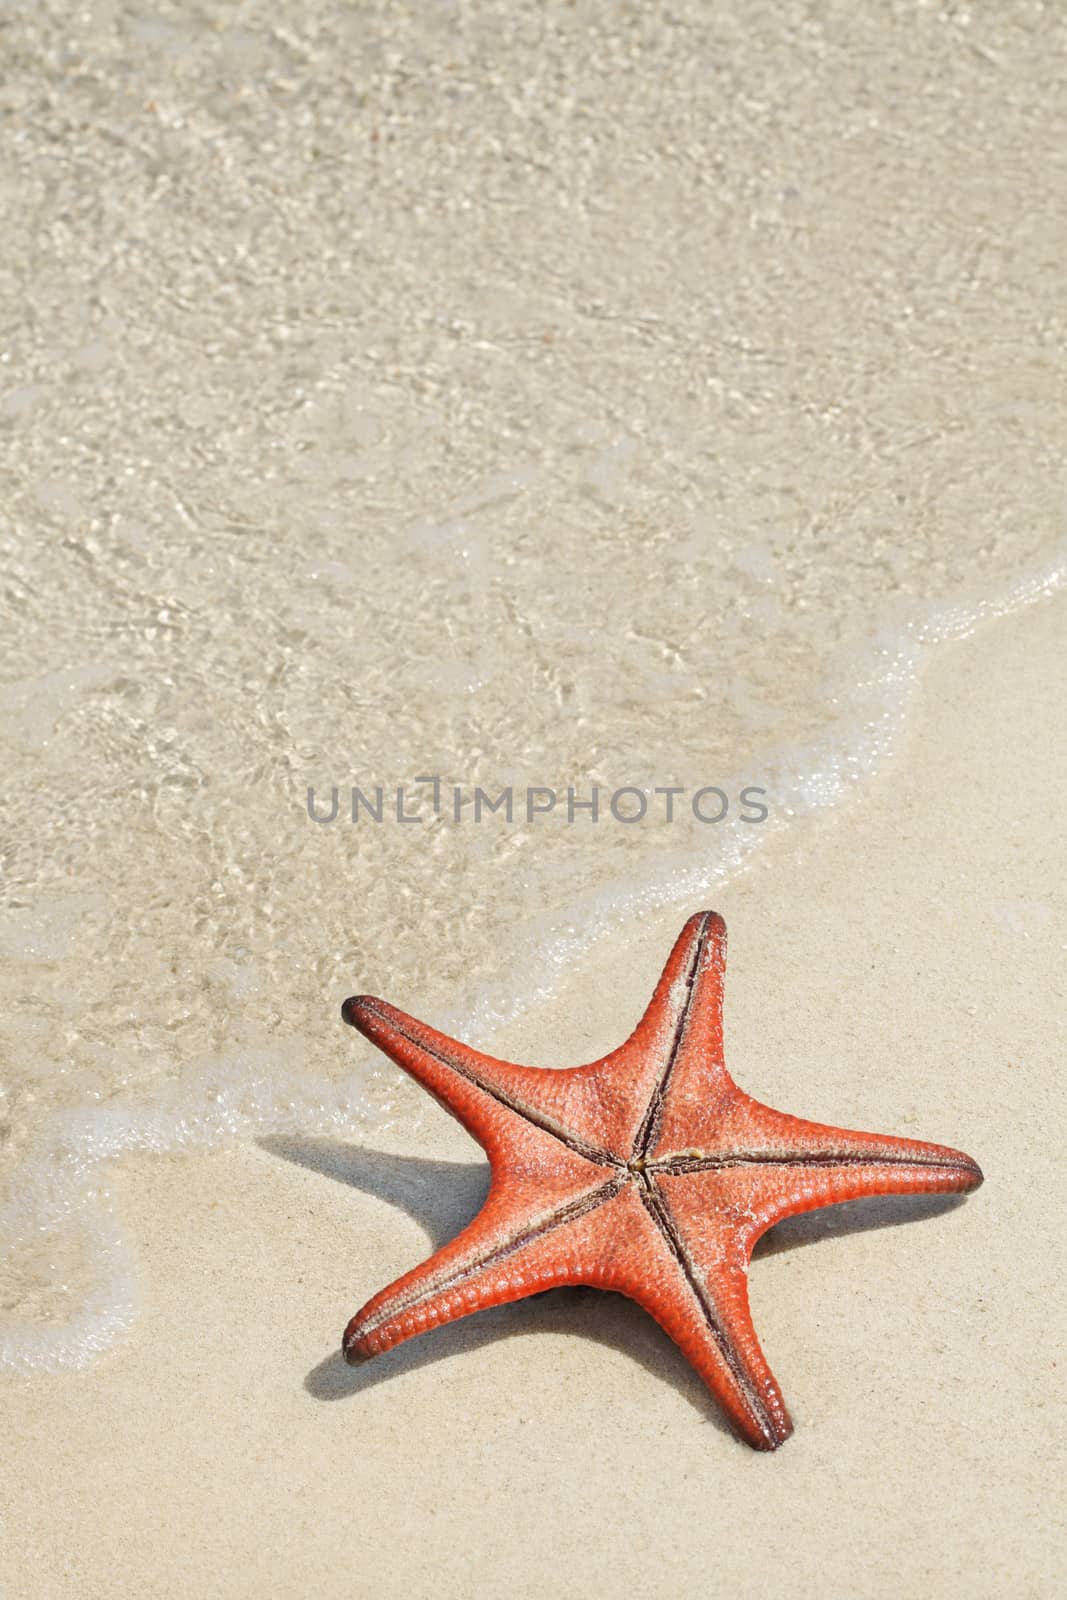 Starfish on the beach by photosoup